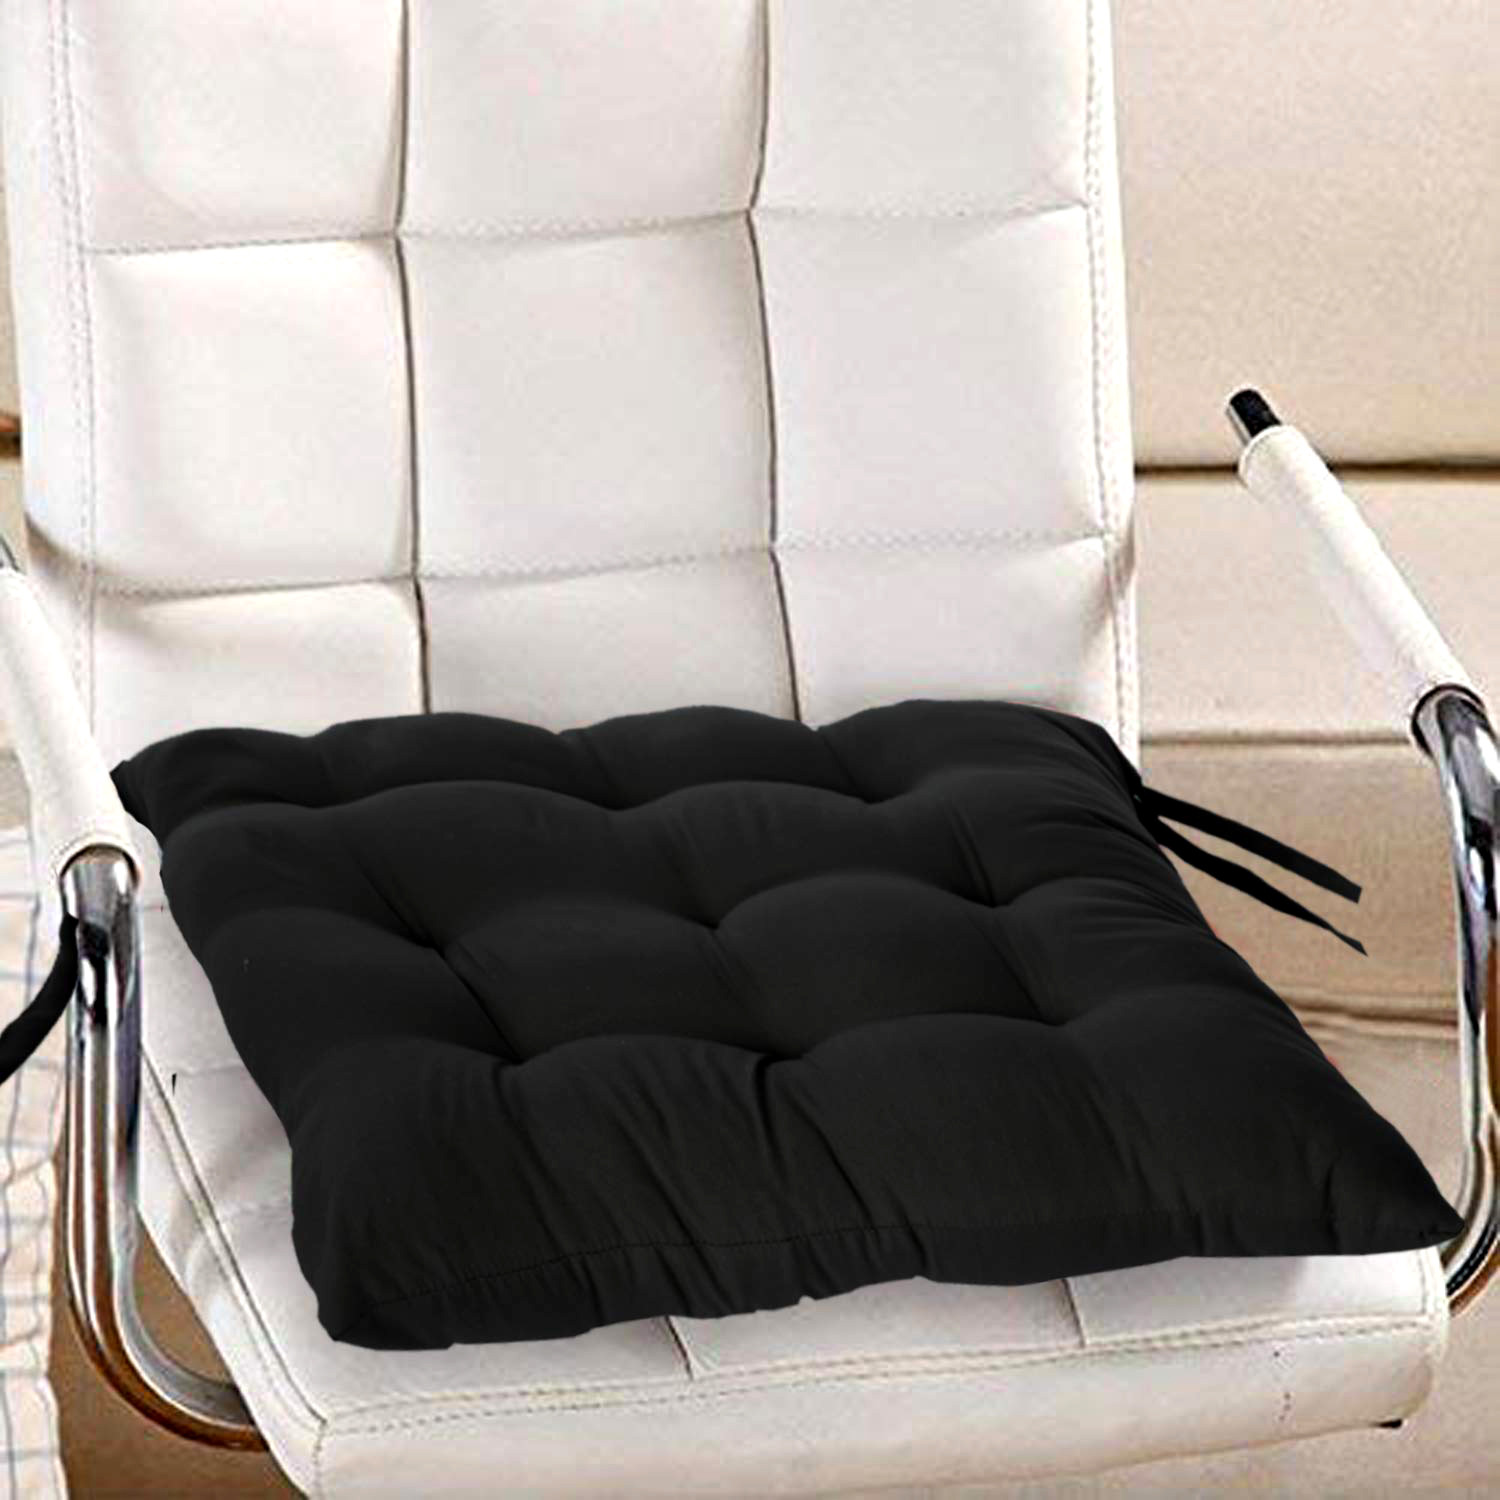 Kuber Industries Microfiber 18*36 Inch Back And Seat Chair Cushion & 18*18 Inch Square Cushion for Rocking Chair, Desk chair, Dining chairs, Lounge chair with Ties- Set of 2 (Black)